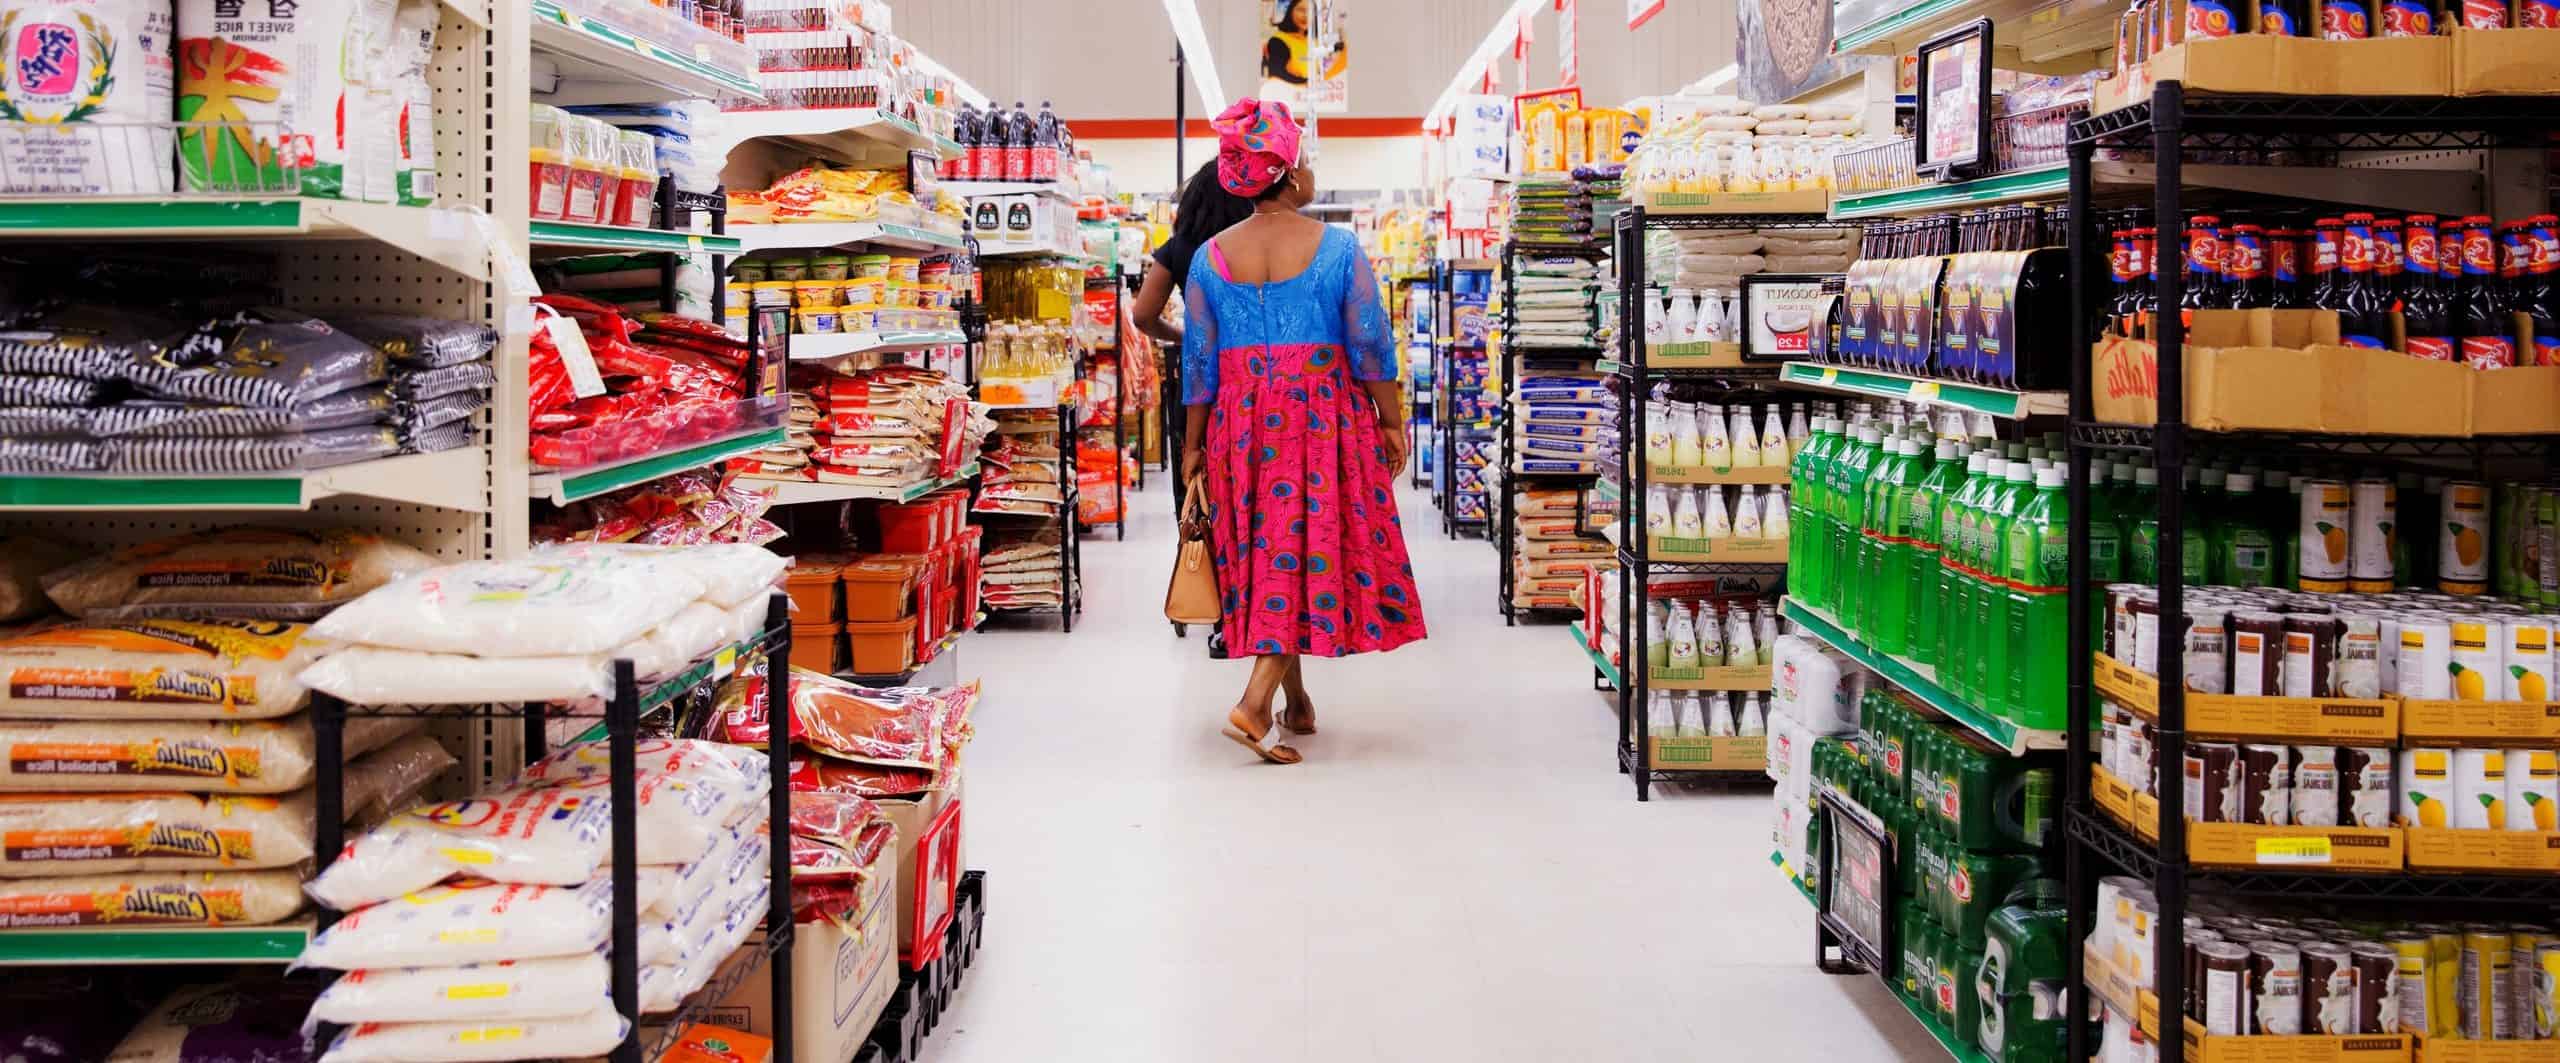 A woman walking down the aisle of a grocery store